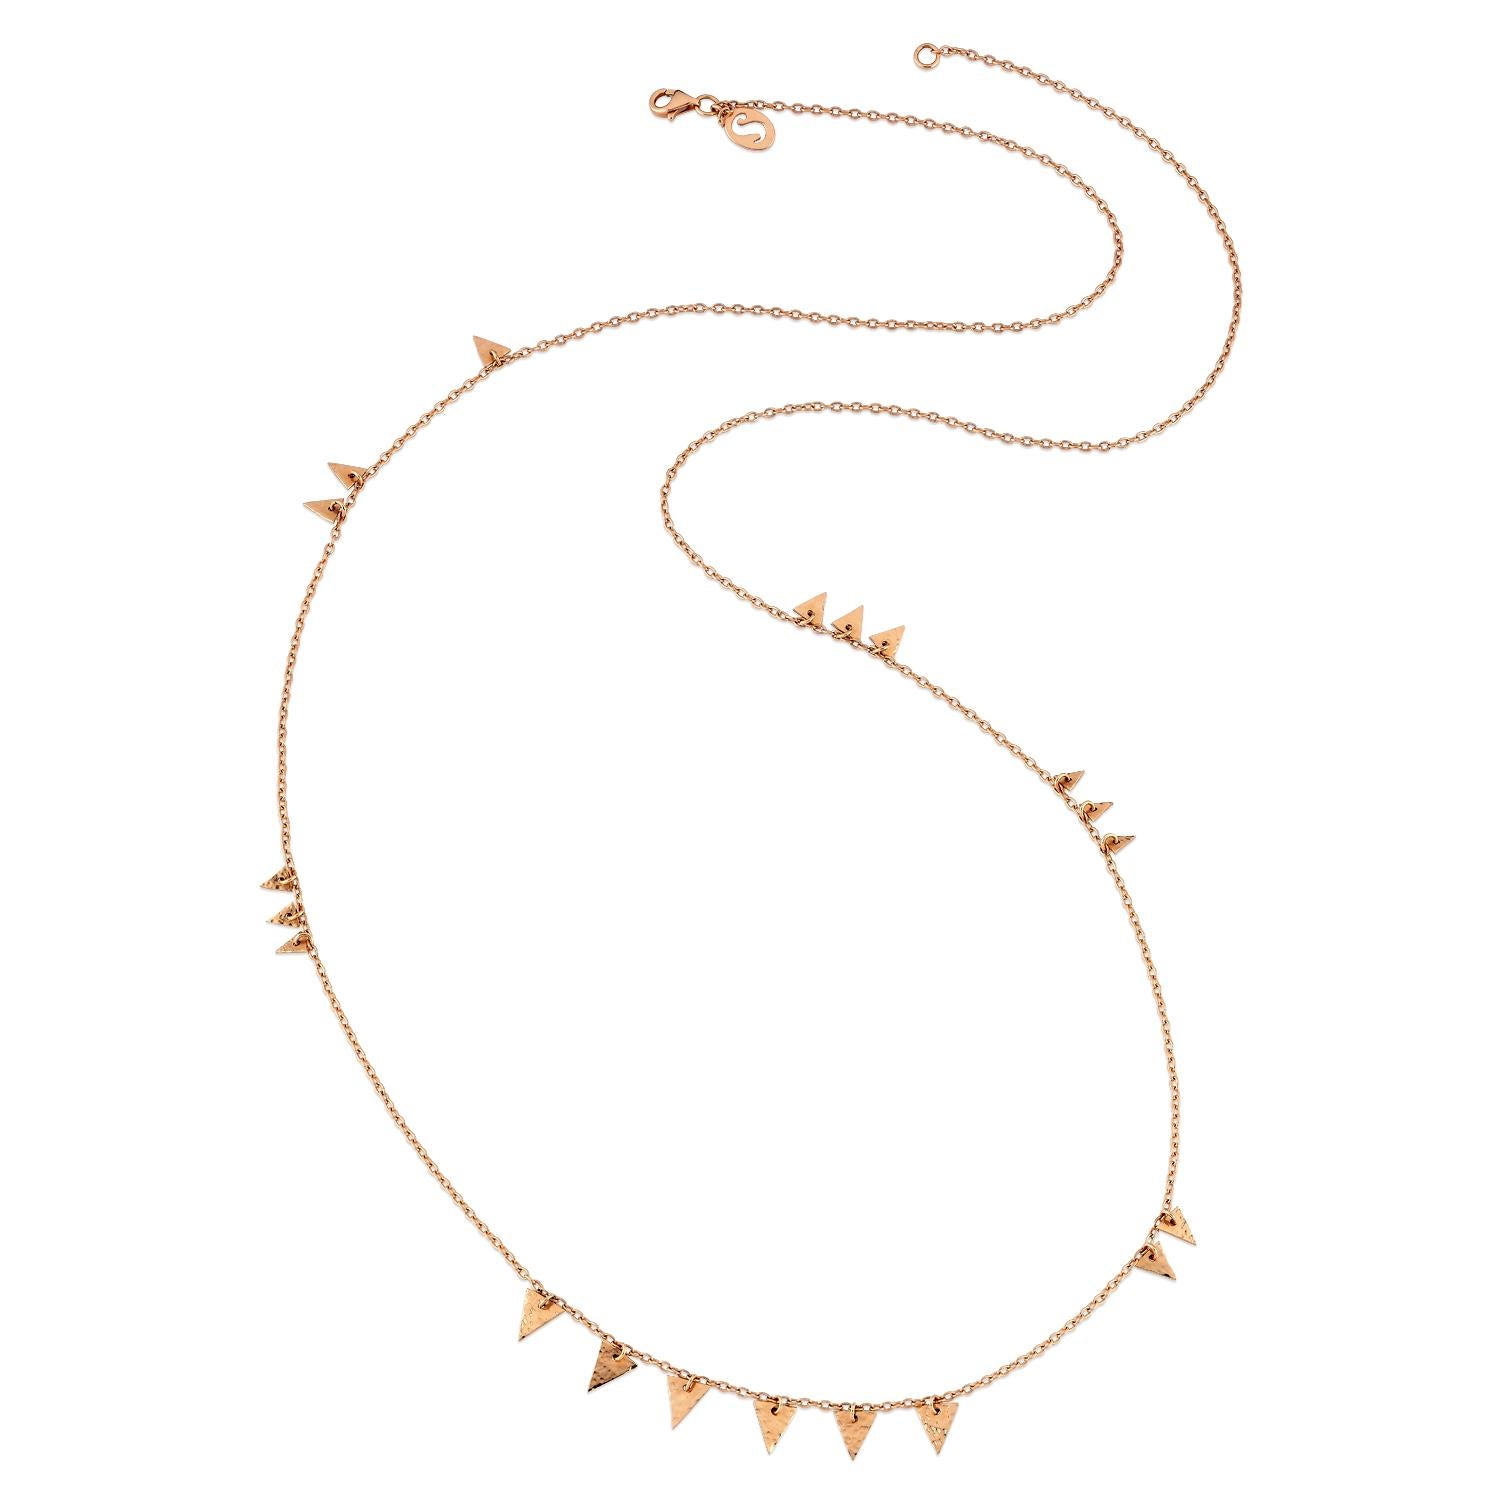 Catch you seed long necklace in 14k rose gold by Selda Jewellery

Additional Information:-
Collection: Dragon lady collection
14K Rose gold
0,07CT White Diamond
Chain length 55cm